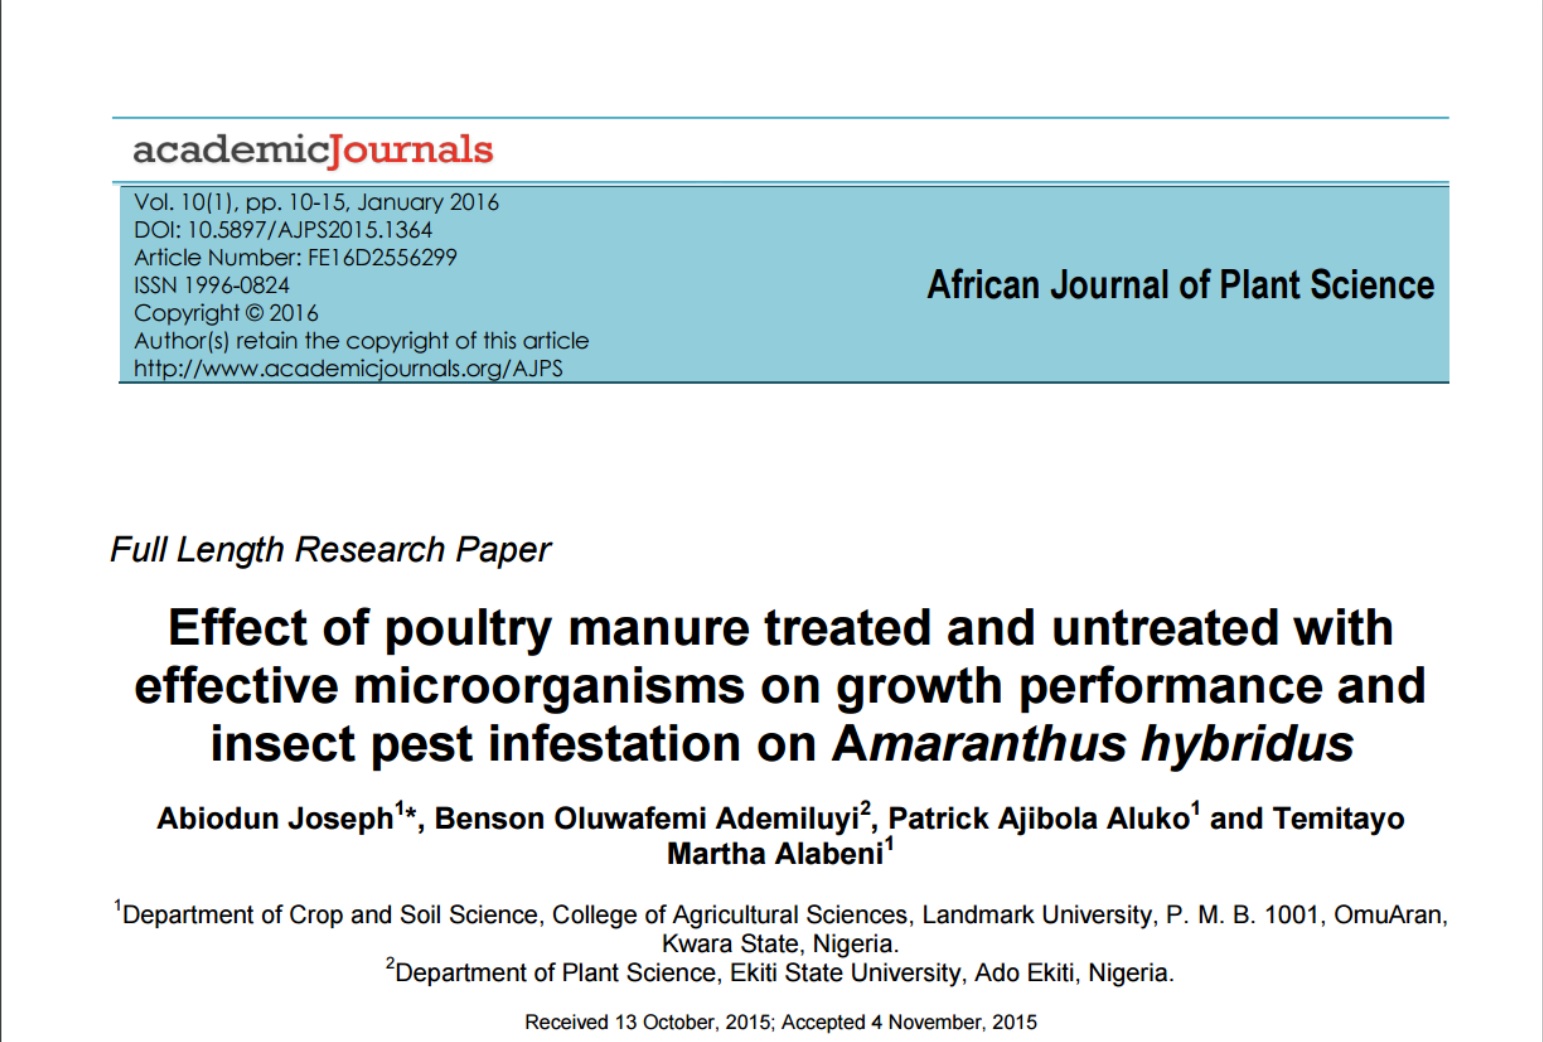 Research Paper at the African Journal of Plant Science